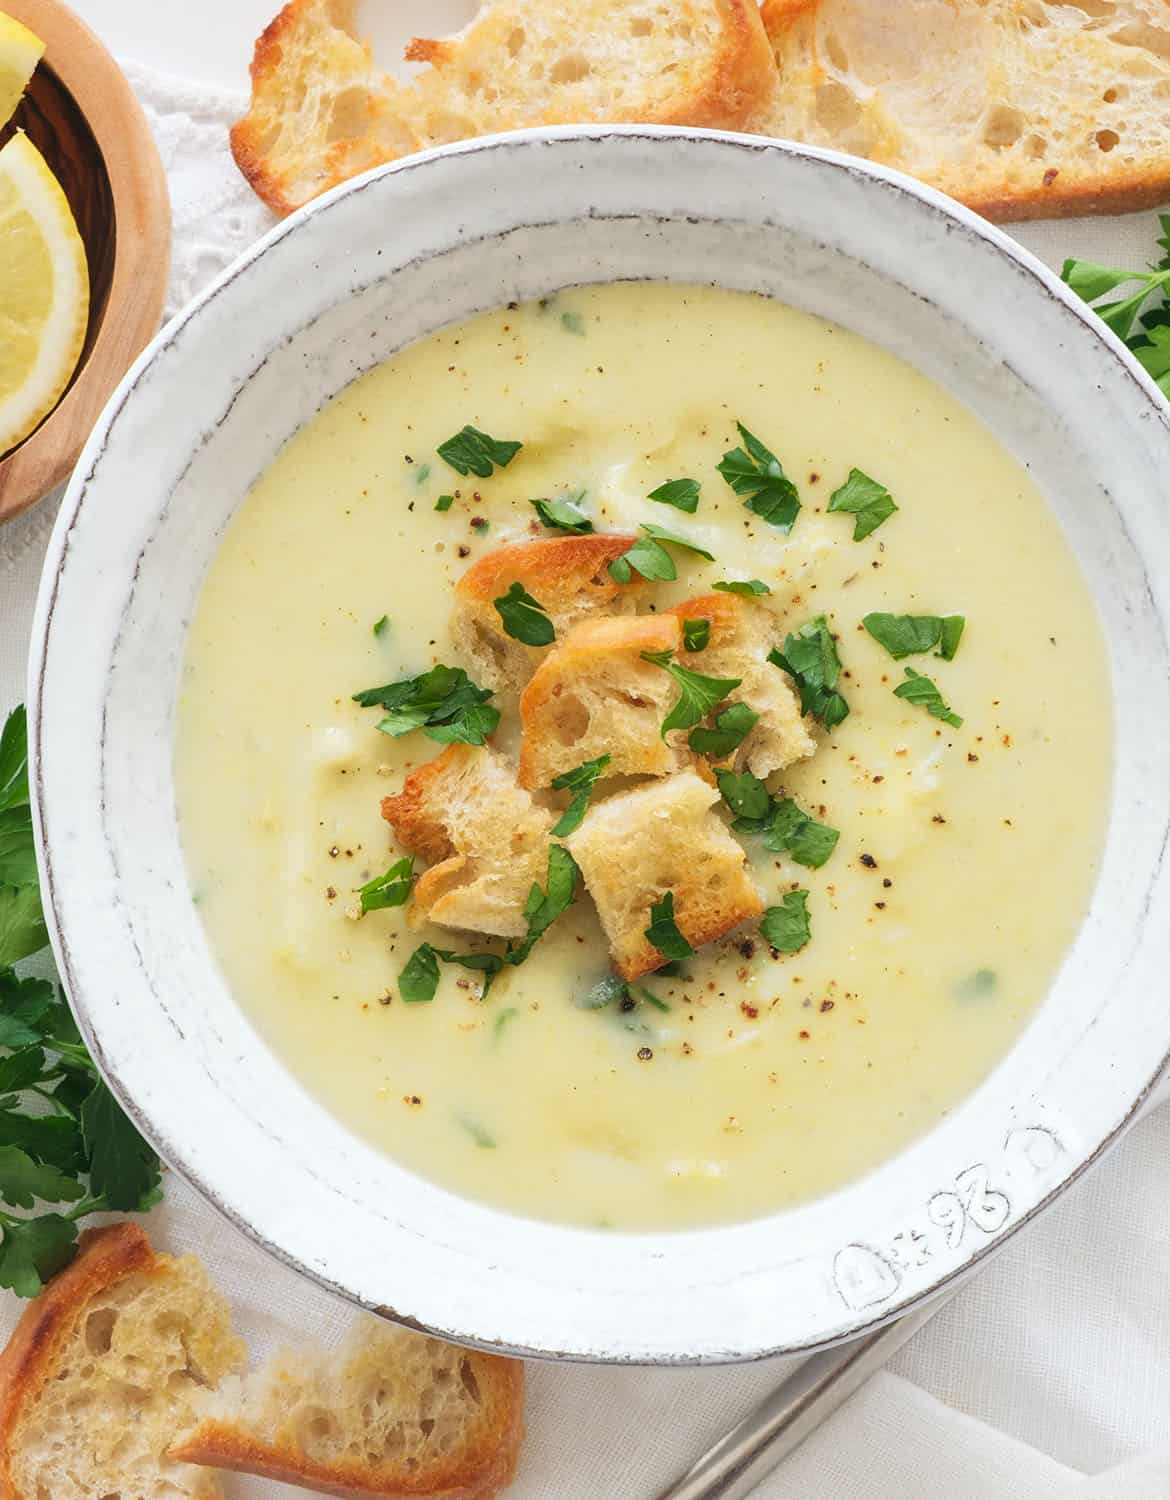 Top view of a white bowl full of creamy artichoke soup served with croutons and parsley.